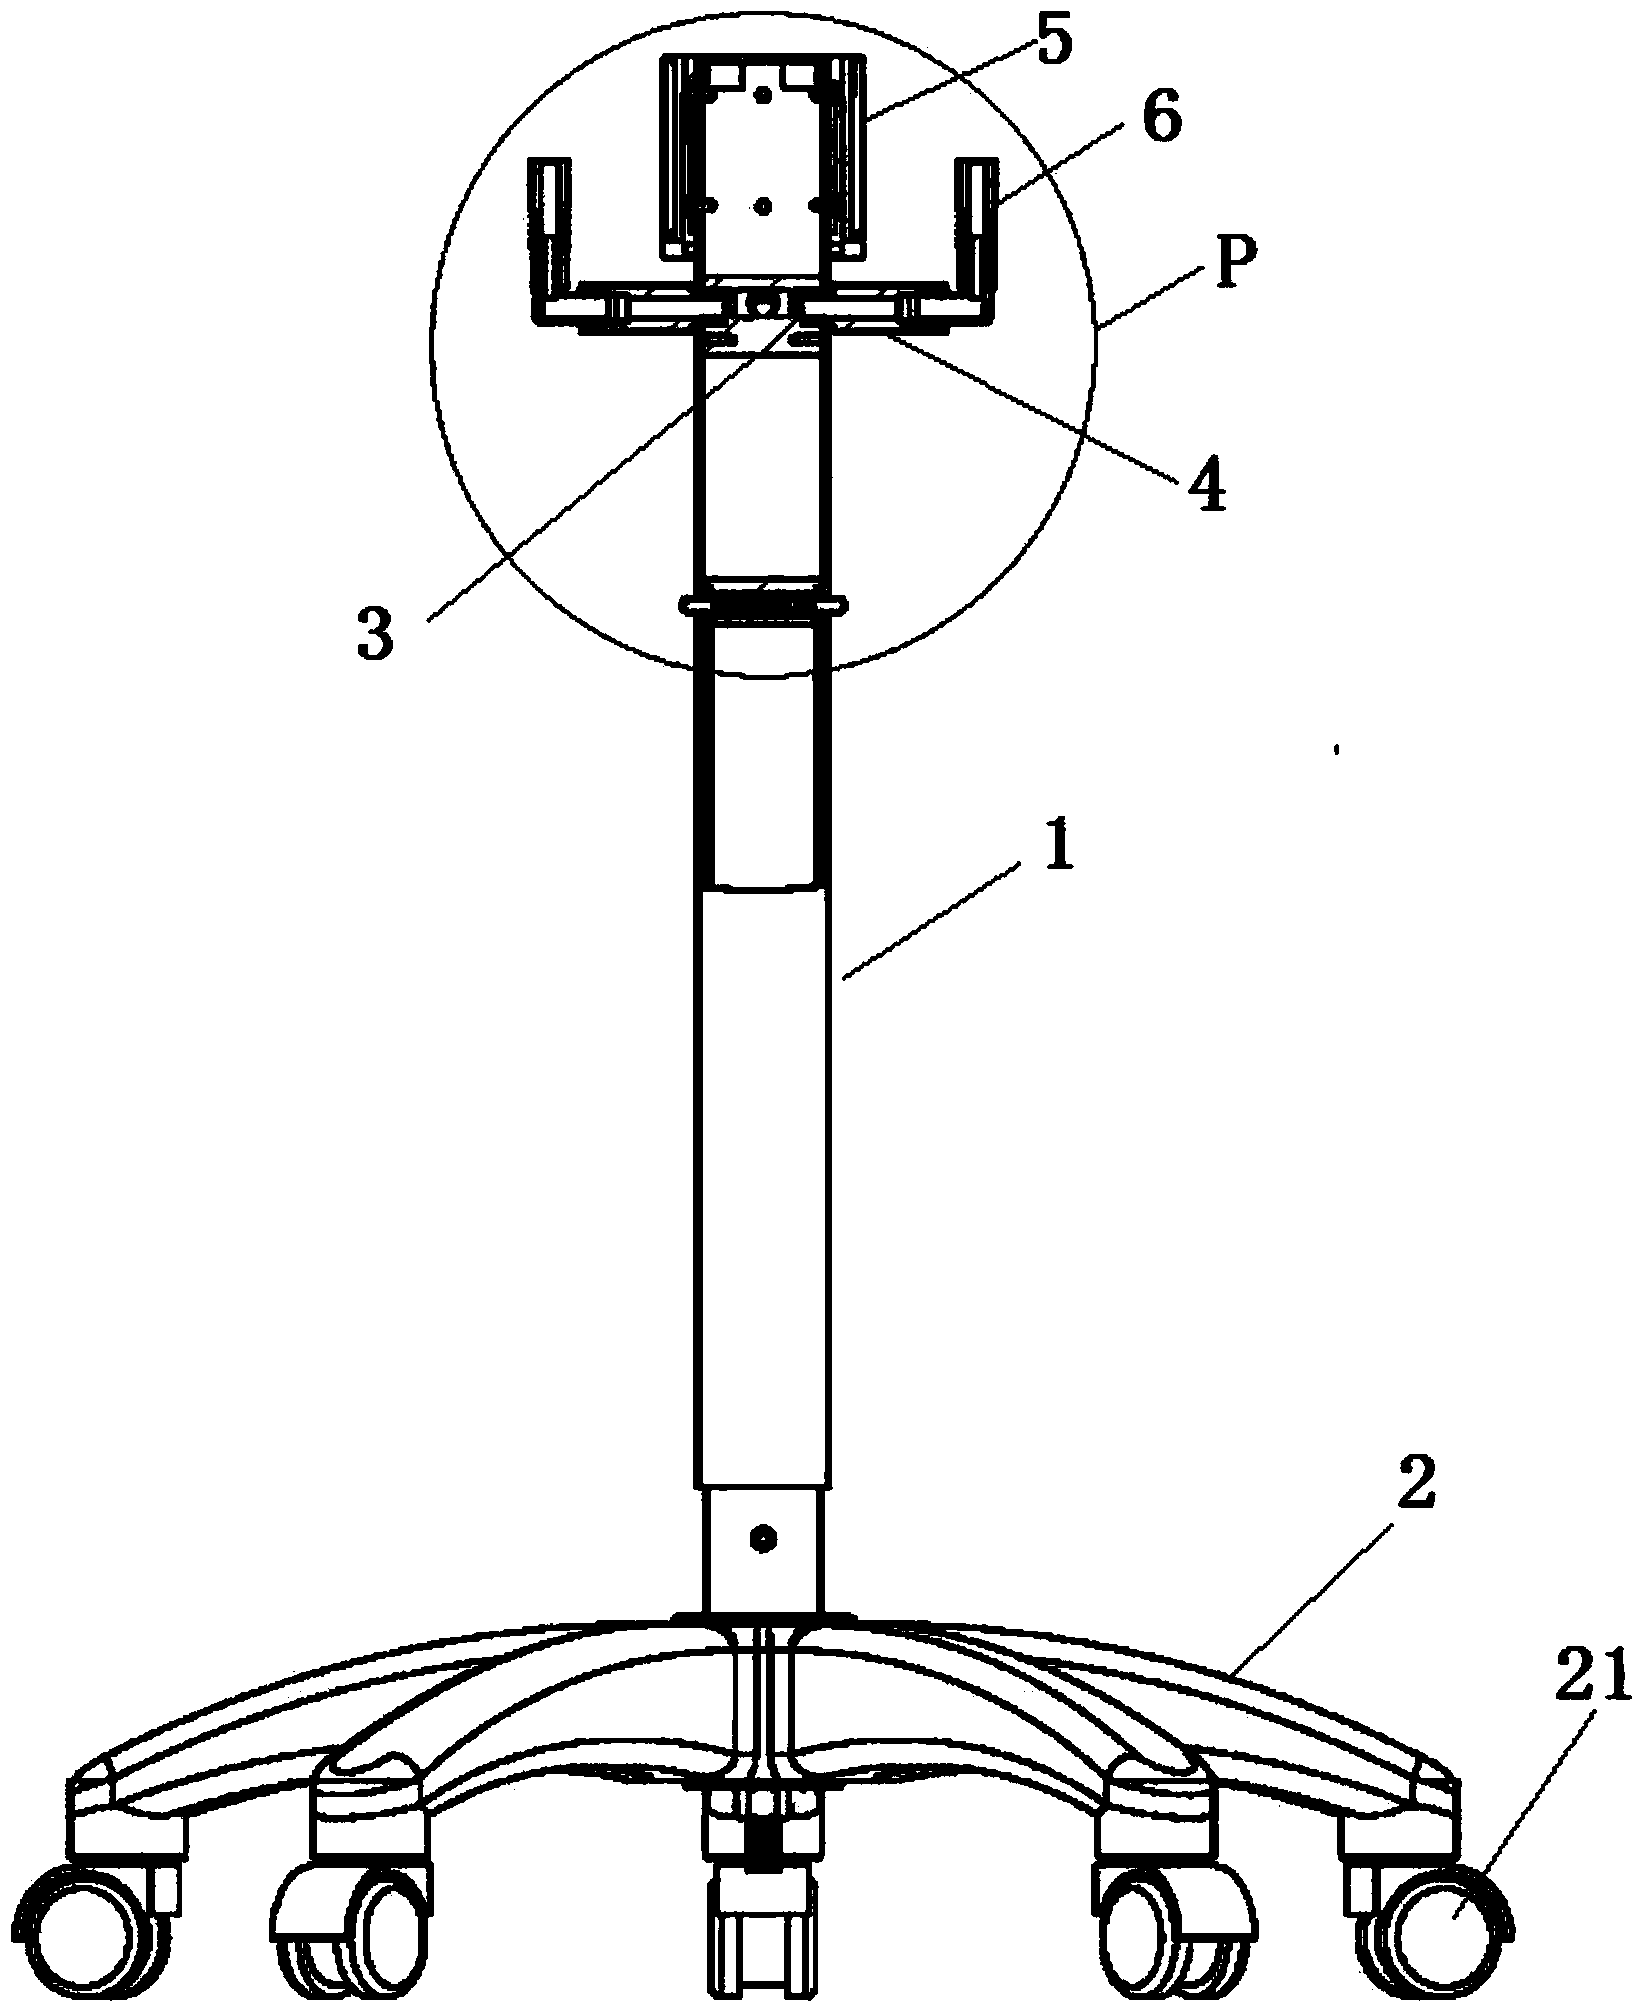 Support used for medical waste liquid collecting system